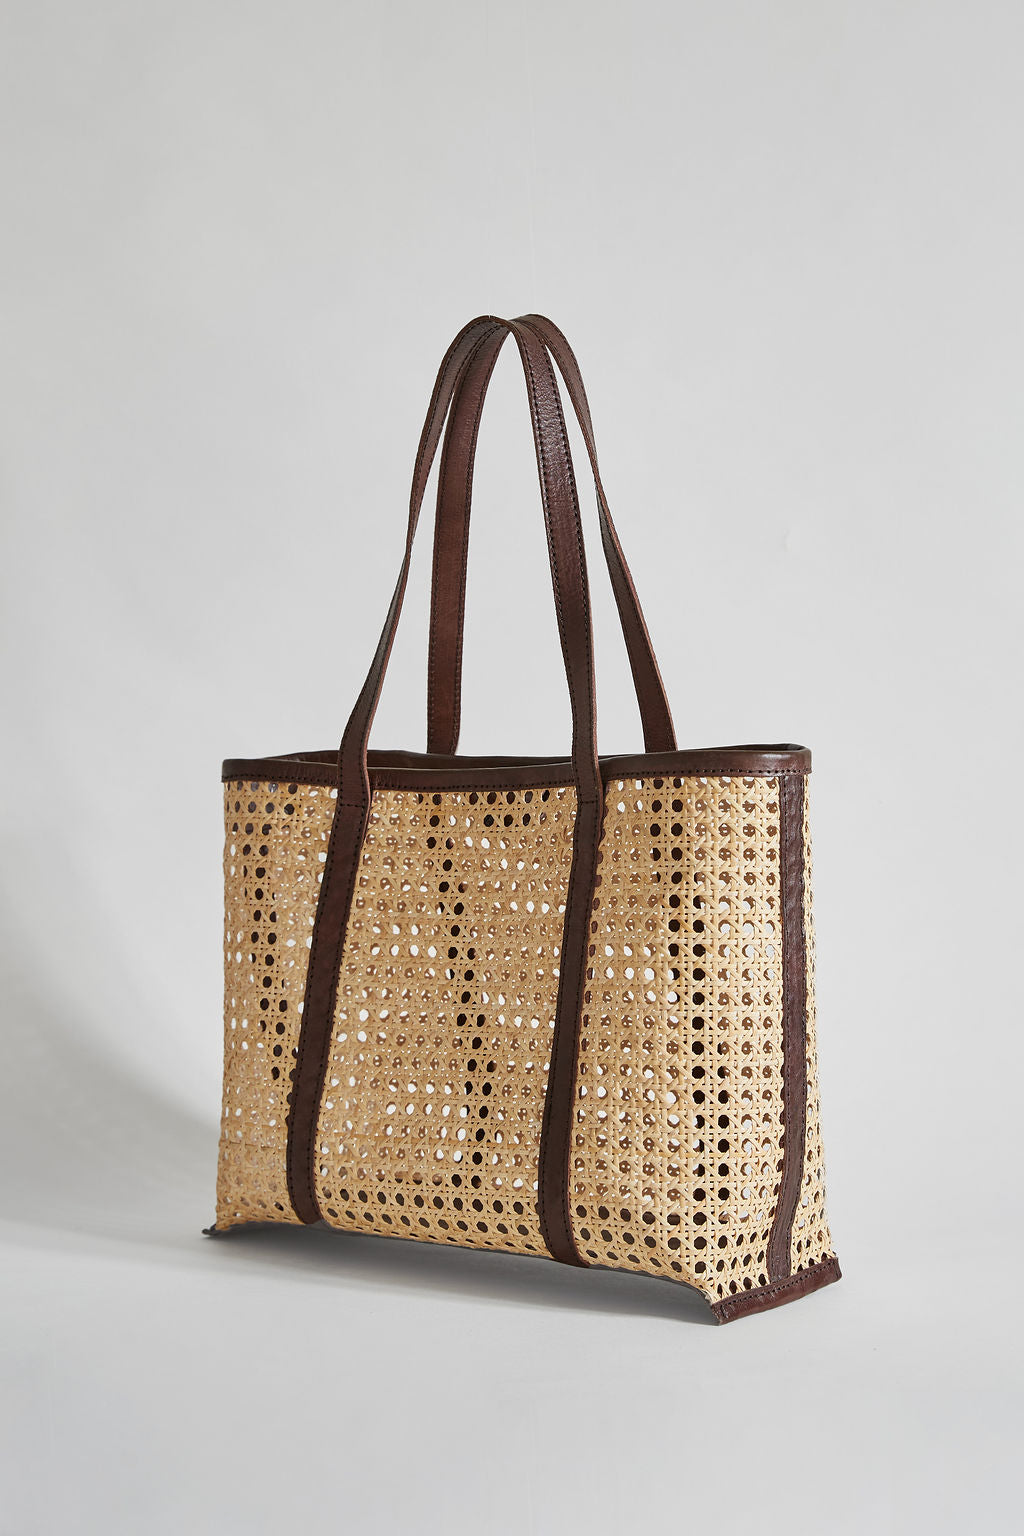 Byron Tote Chocolate - Small